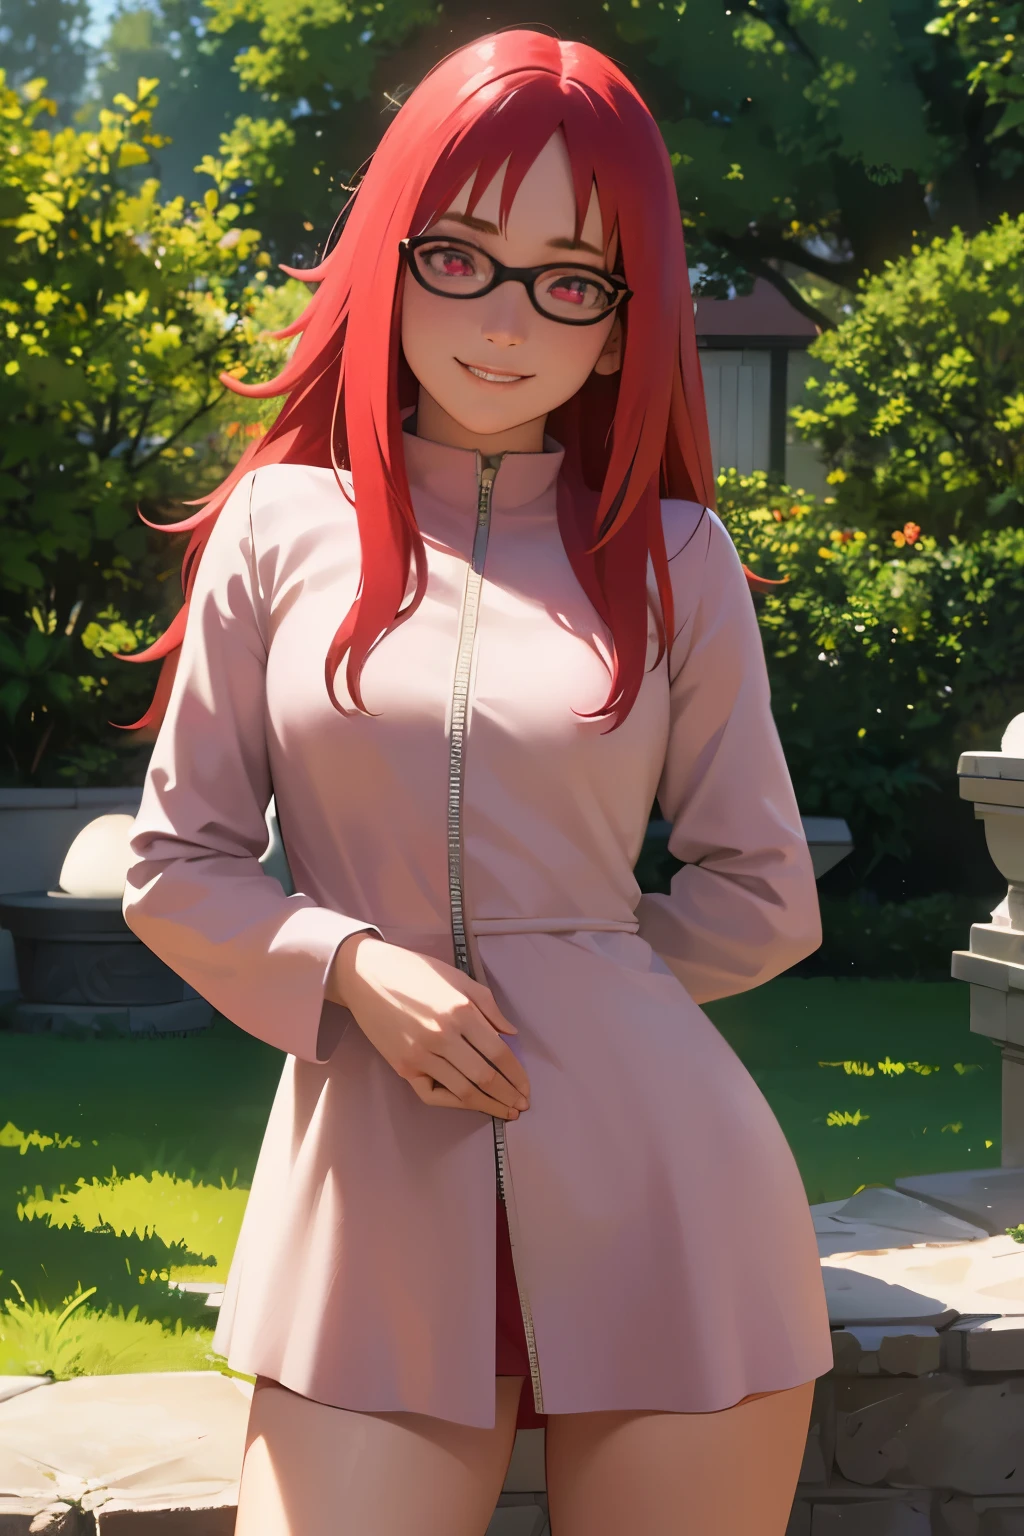 (best quality,4k,ultra-detailed),(realistic:1.37),HDR,professional,portrait,colorful,soft lighting,Karin Uzumaki,beautiful detailed eyes,red eyes, glassesbeautiful detailed lips,smiling gently,red hair flowing,happy expression,playful personality,long wavy hair,rosy cheeks,yellow dress,playful pose,feminine charm,lewd smirk,lifting dress,showing off panties,teasing look,confident stance,blossoming garden background